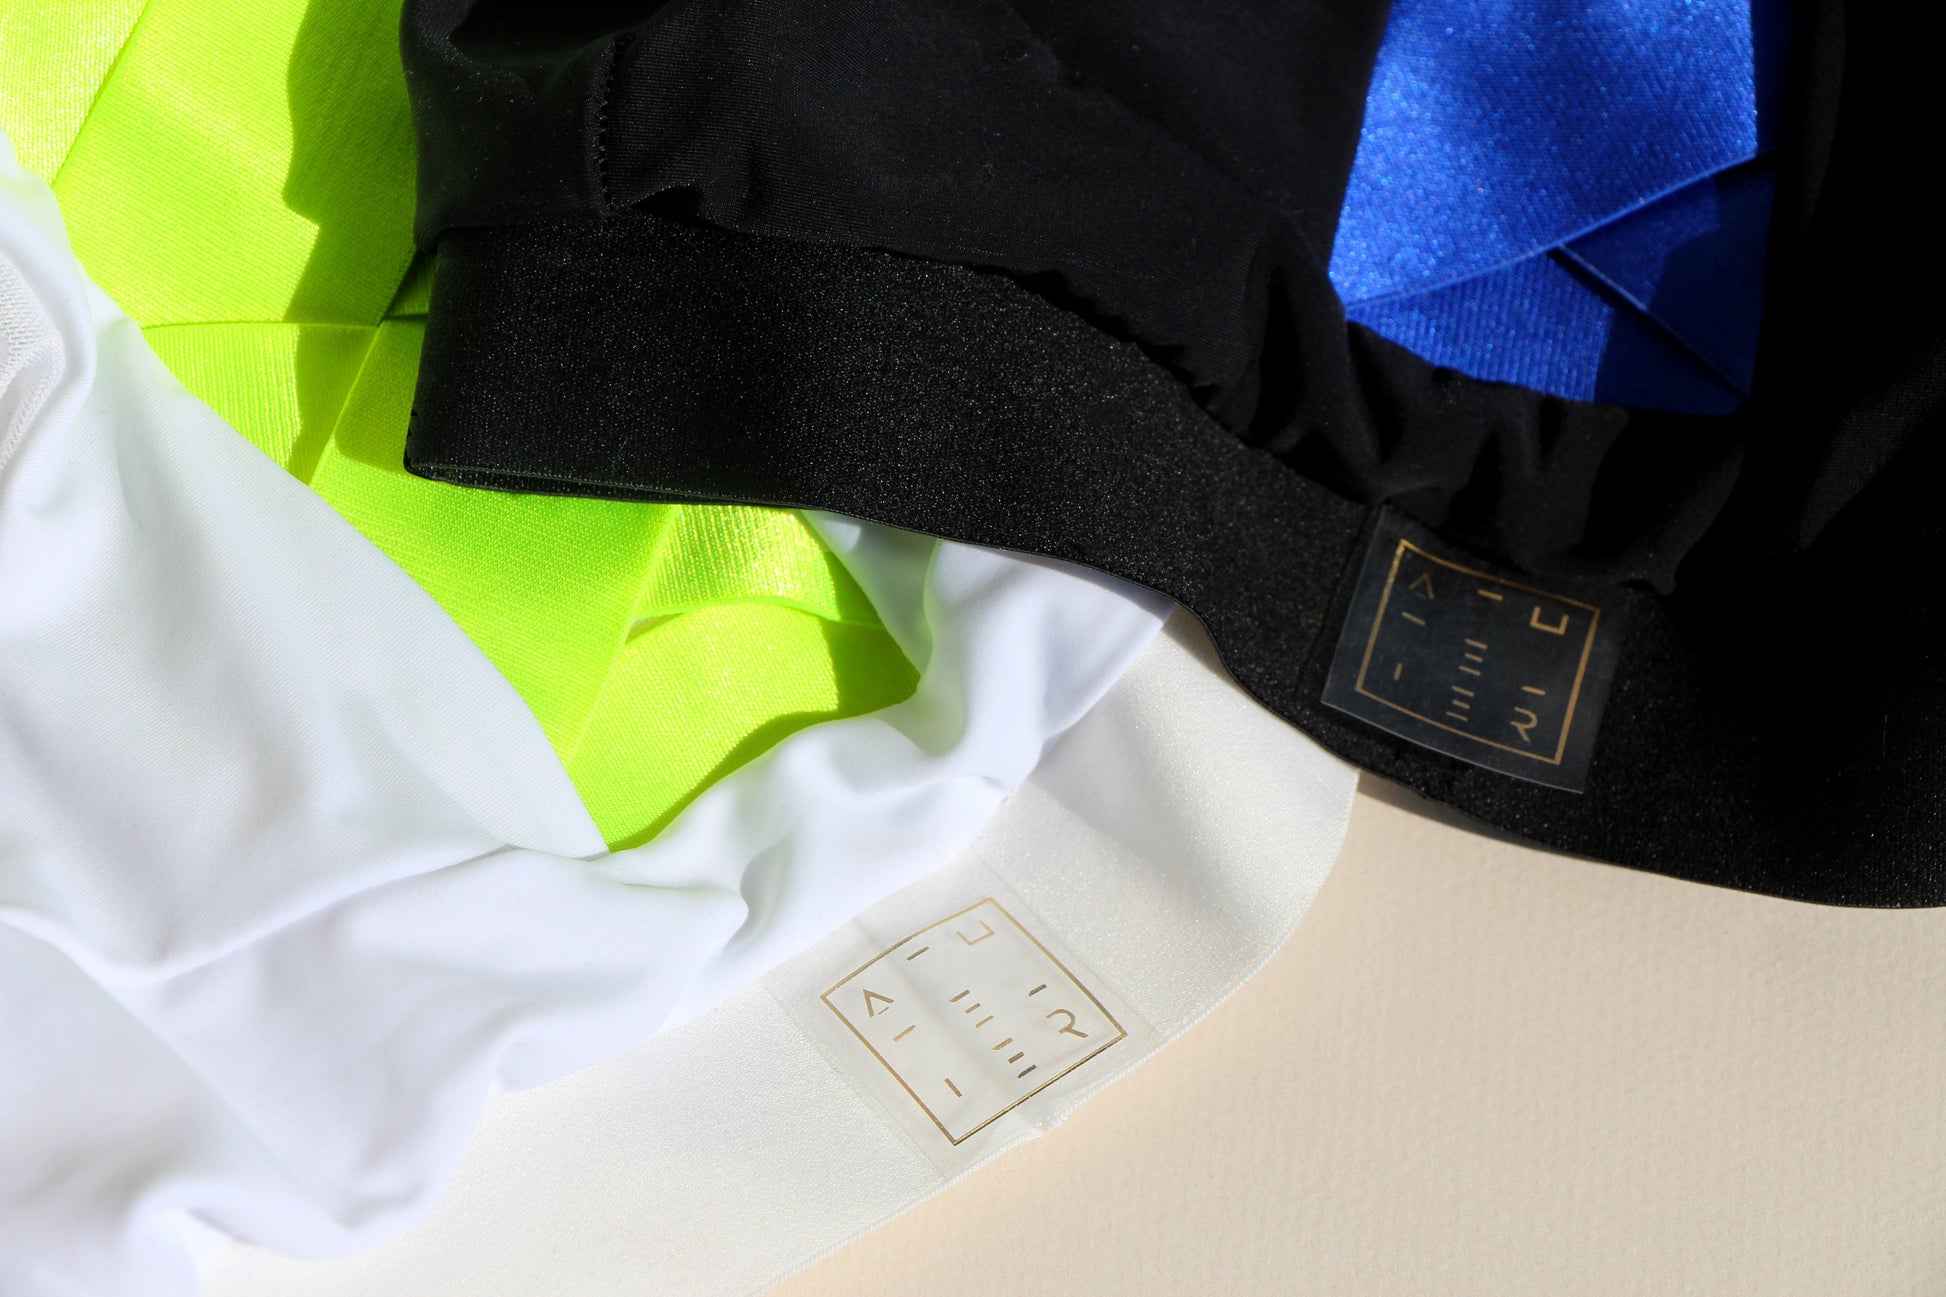 a close up shot of two sports bra waistbands, one in black and one in white